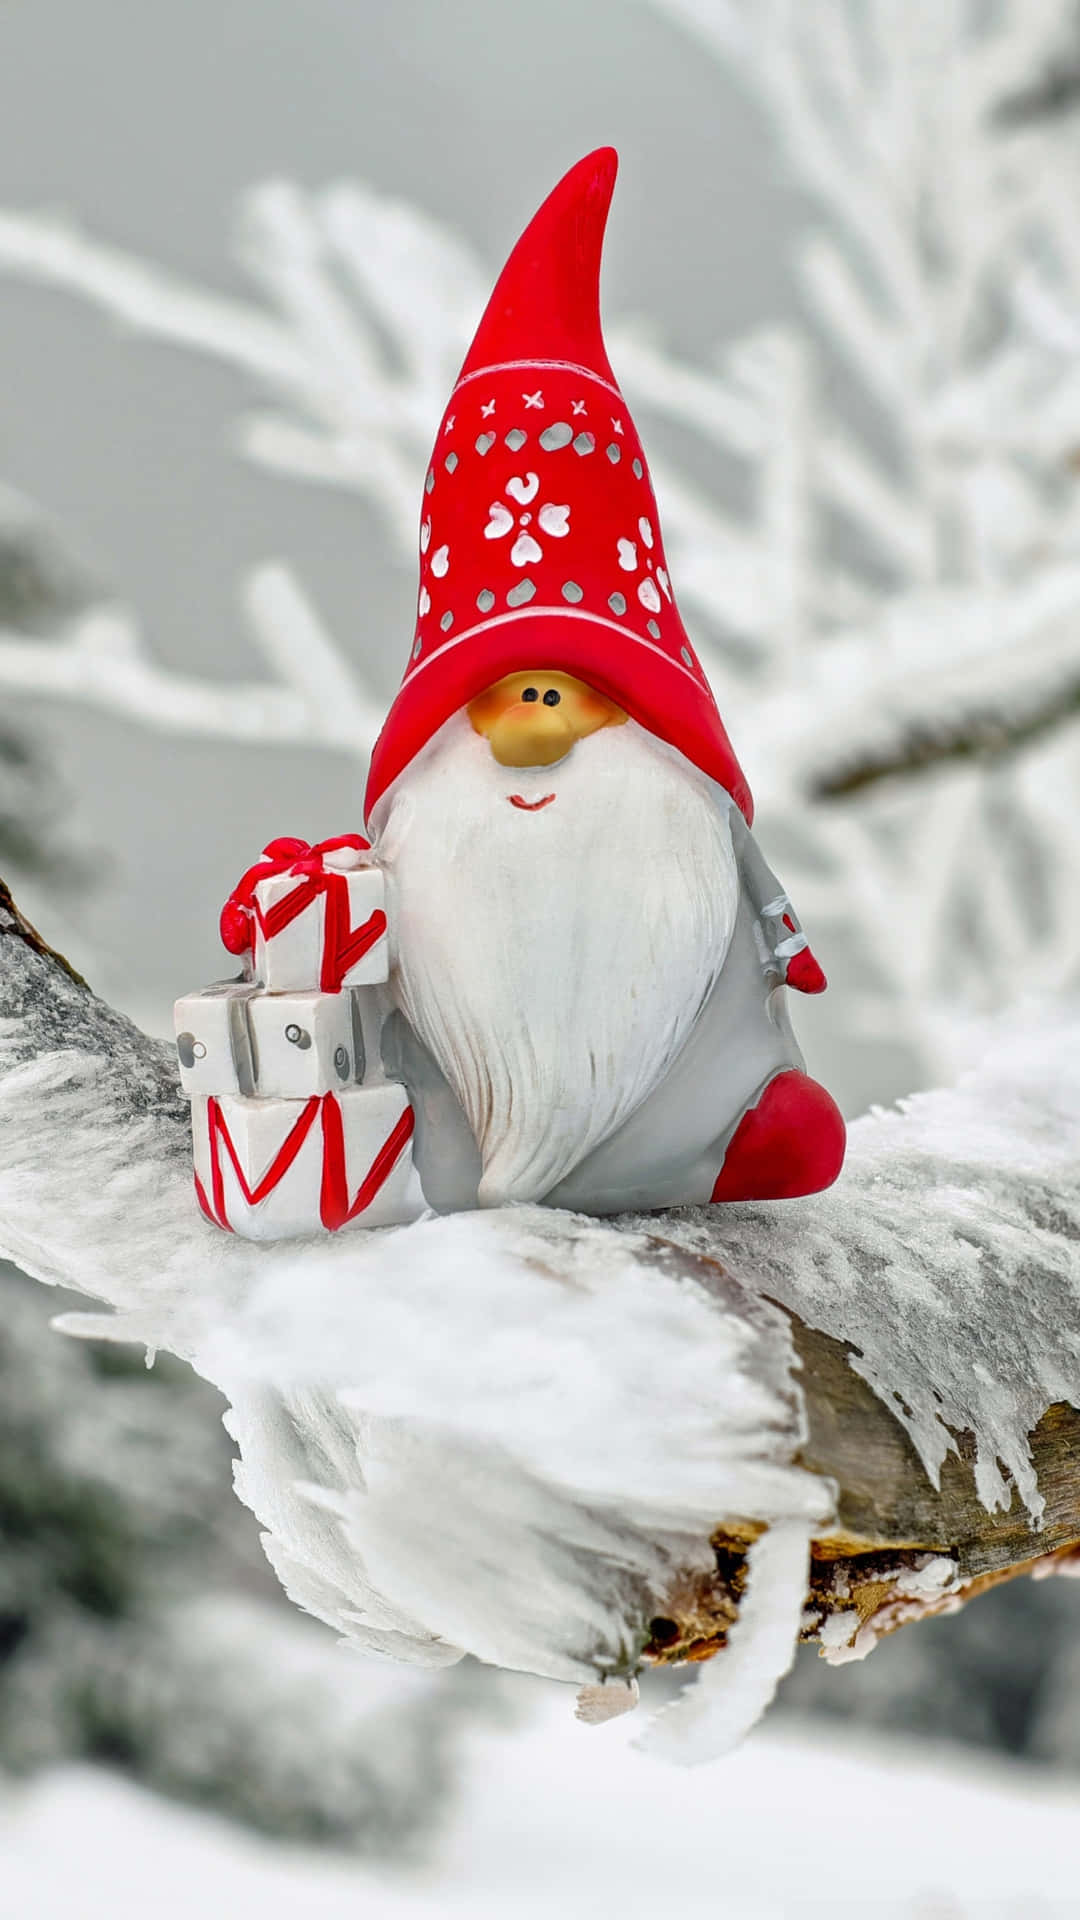 Brighten your Christmas with a cheerful gnome. Wallpaper